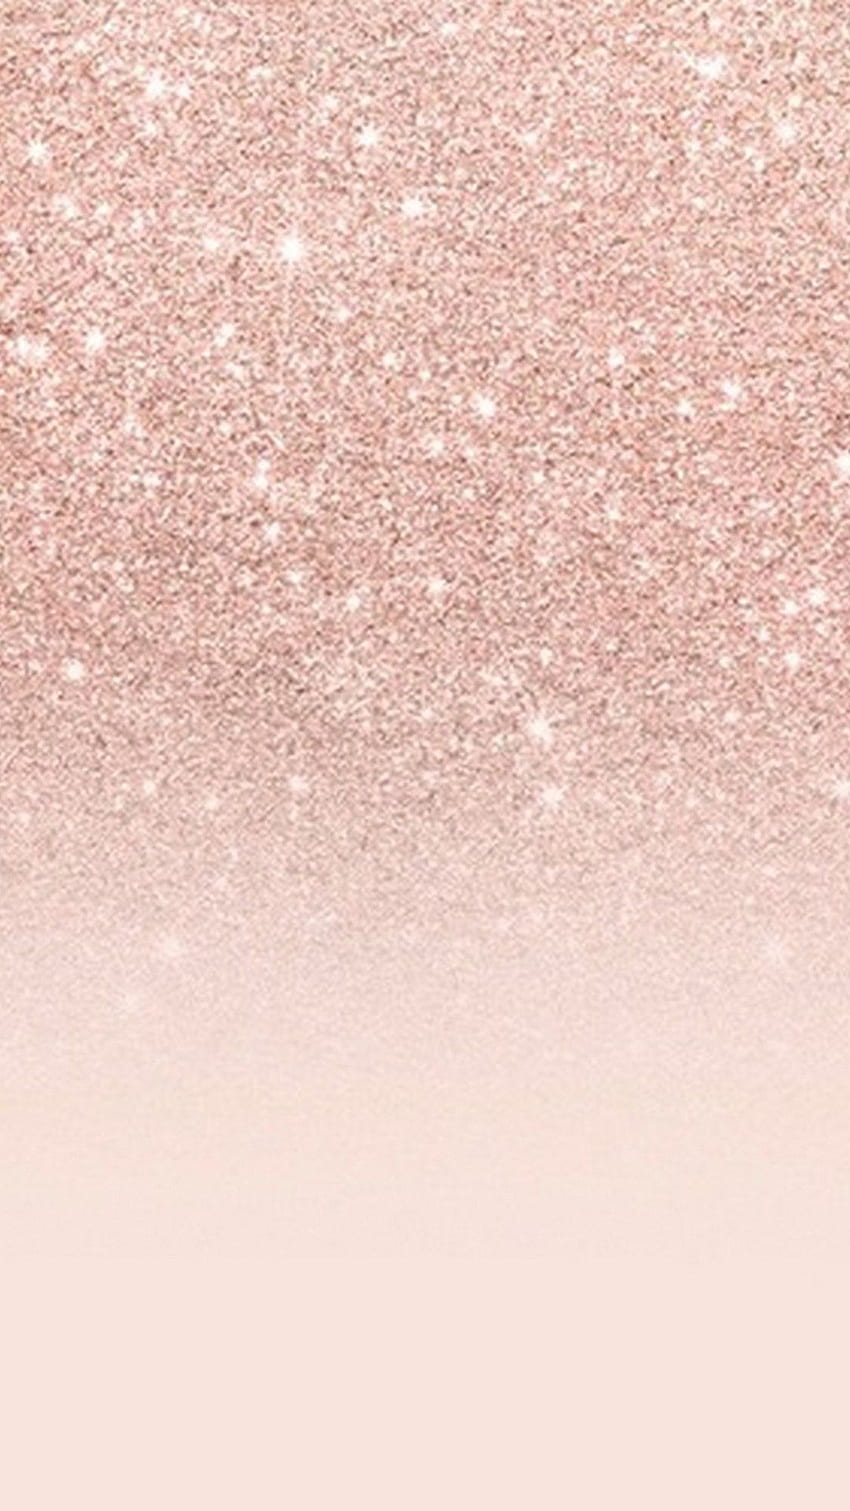 Cute Rose Gold Starbucks Android Background in 2020. Rose gold iphone, Gold background, Gold ombre HD phone wallpaper